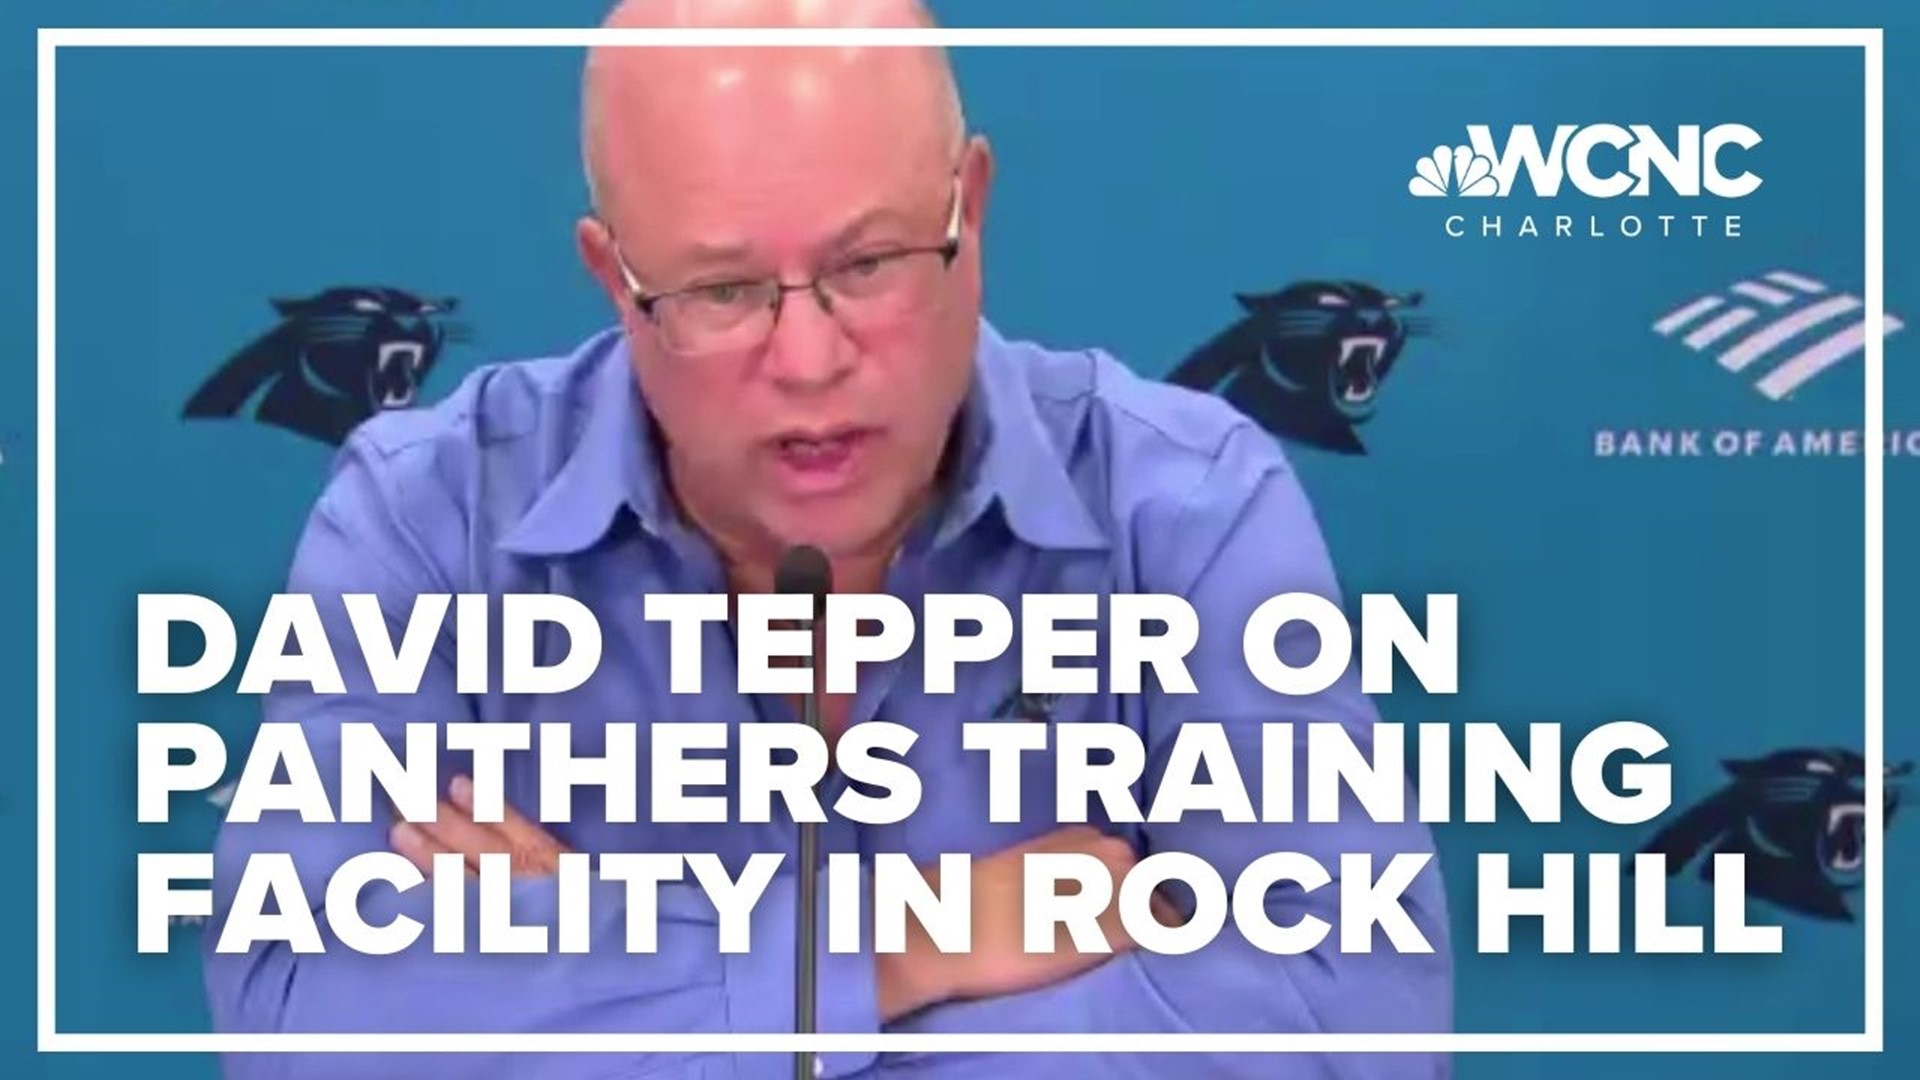 Panthers owner David Tepper said he will "respect" the city of Rock Hill's request to not have a public back and forth about the team's training facility.